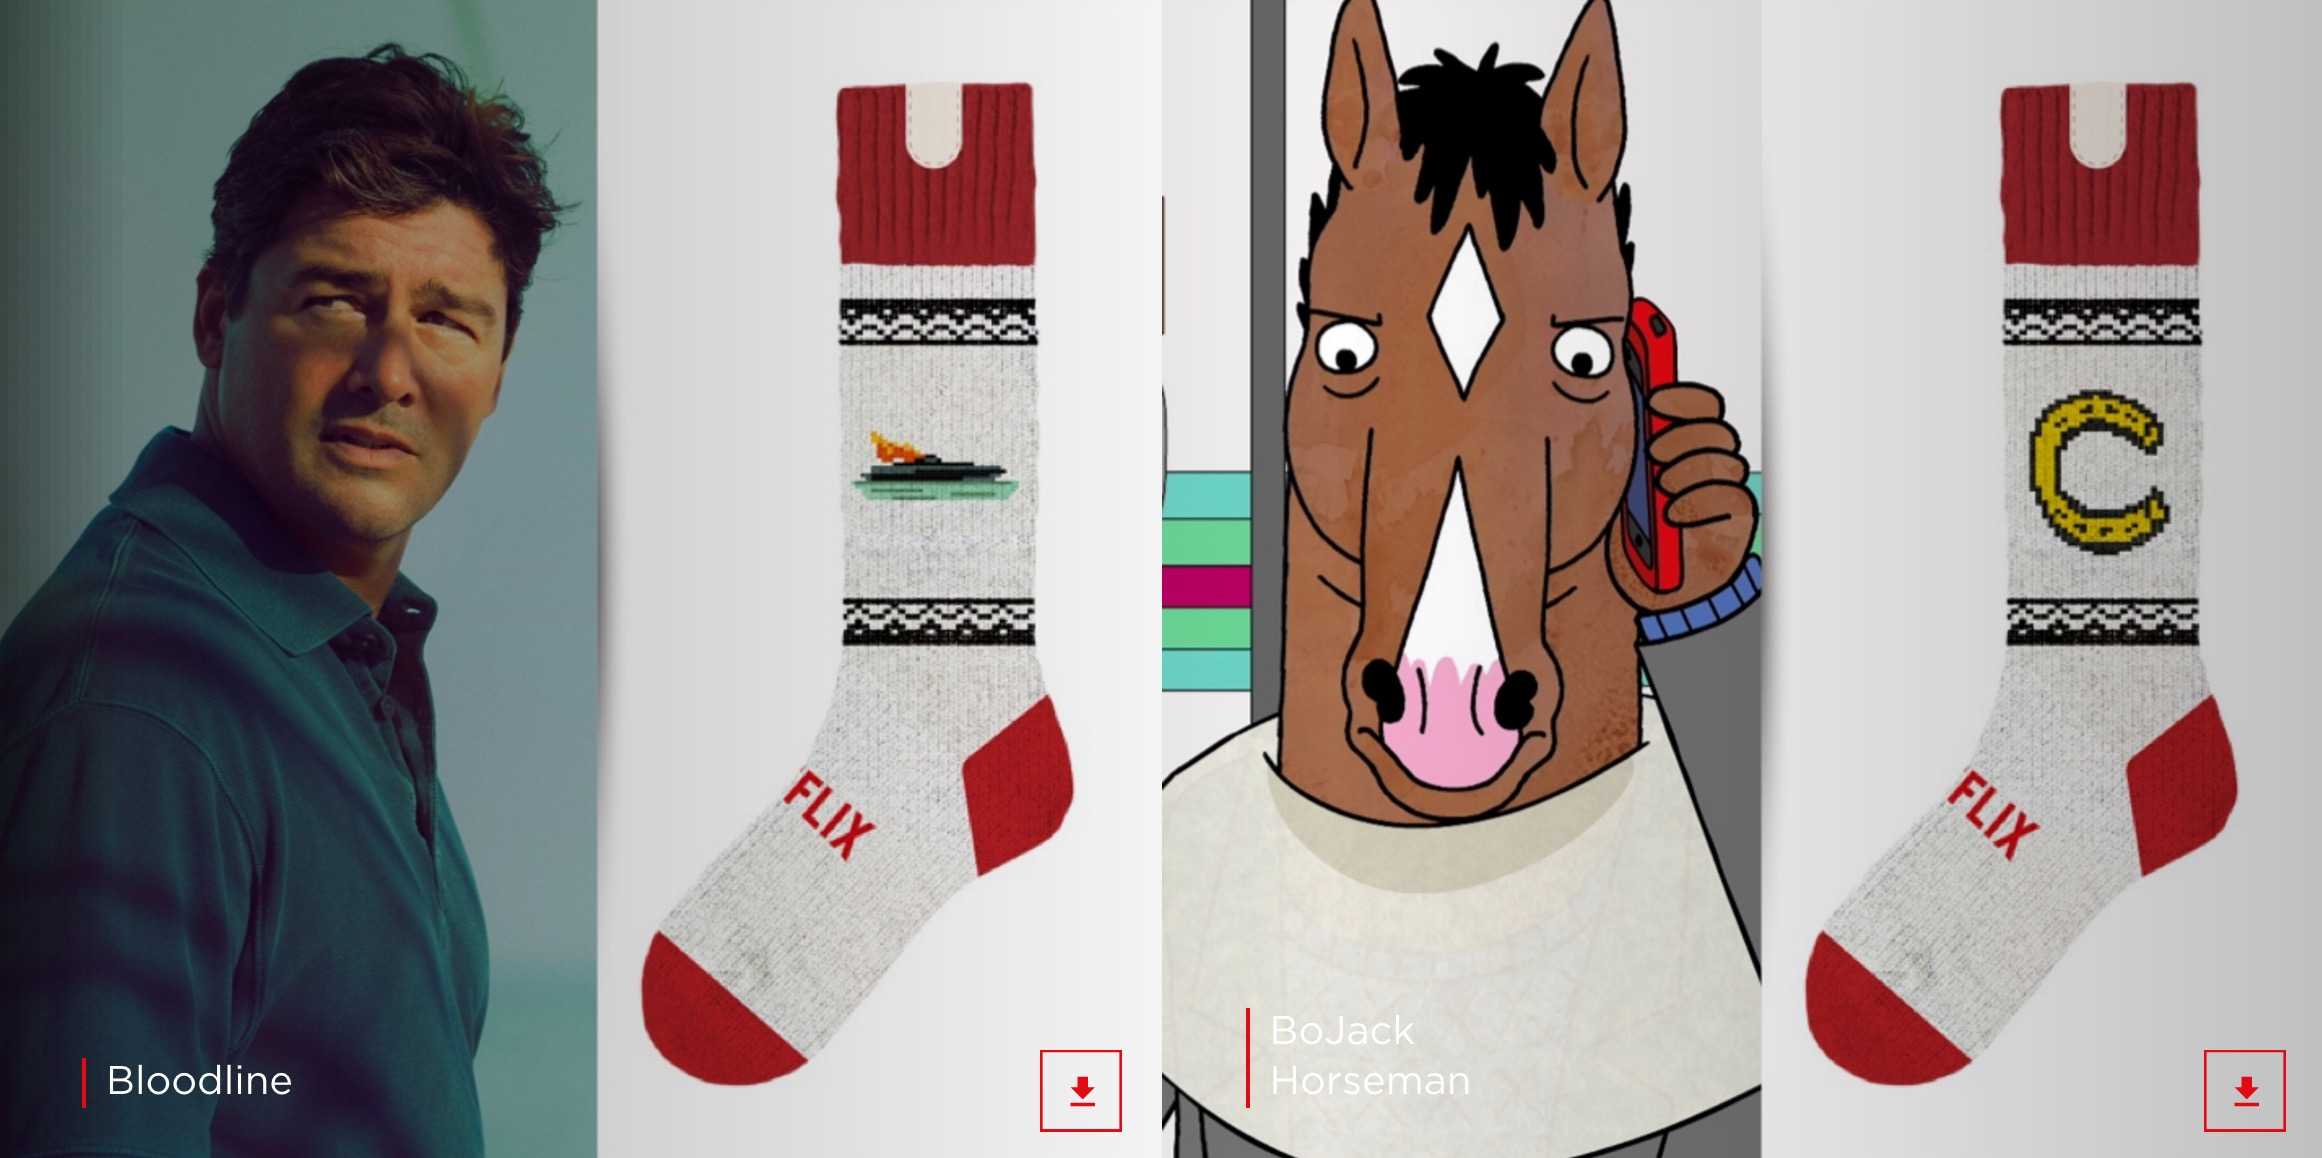 With socks like these, you'll be the hit of any Netflix party.